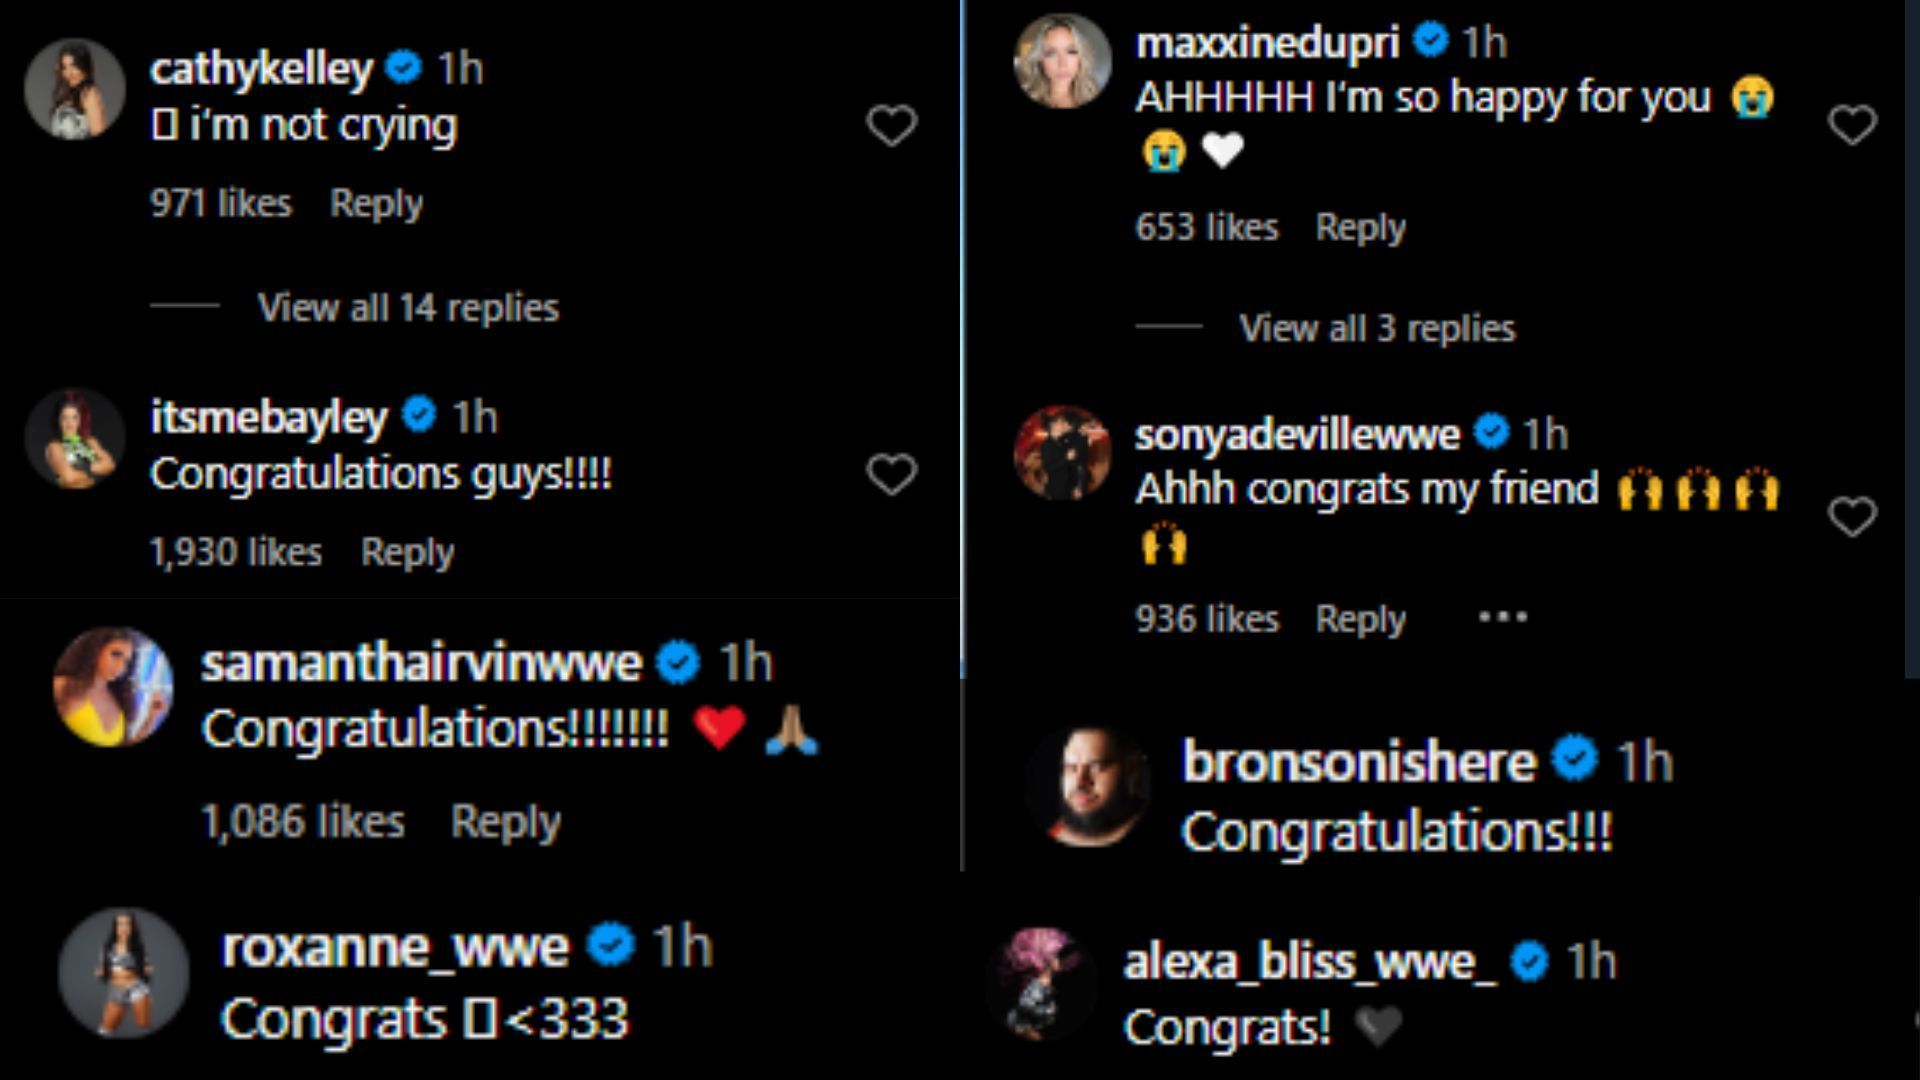 WWE Superstars shared their love for Rhea Ripley in the comments